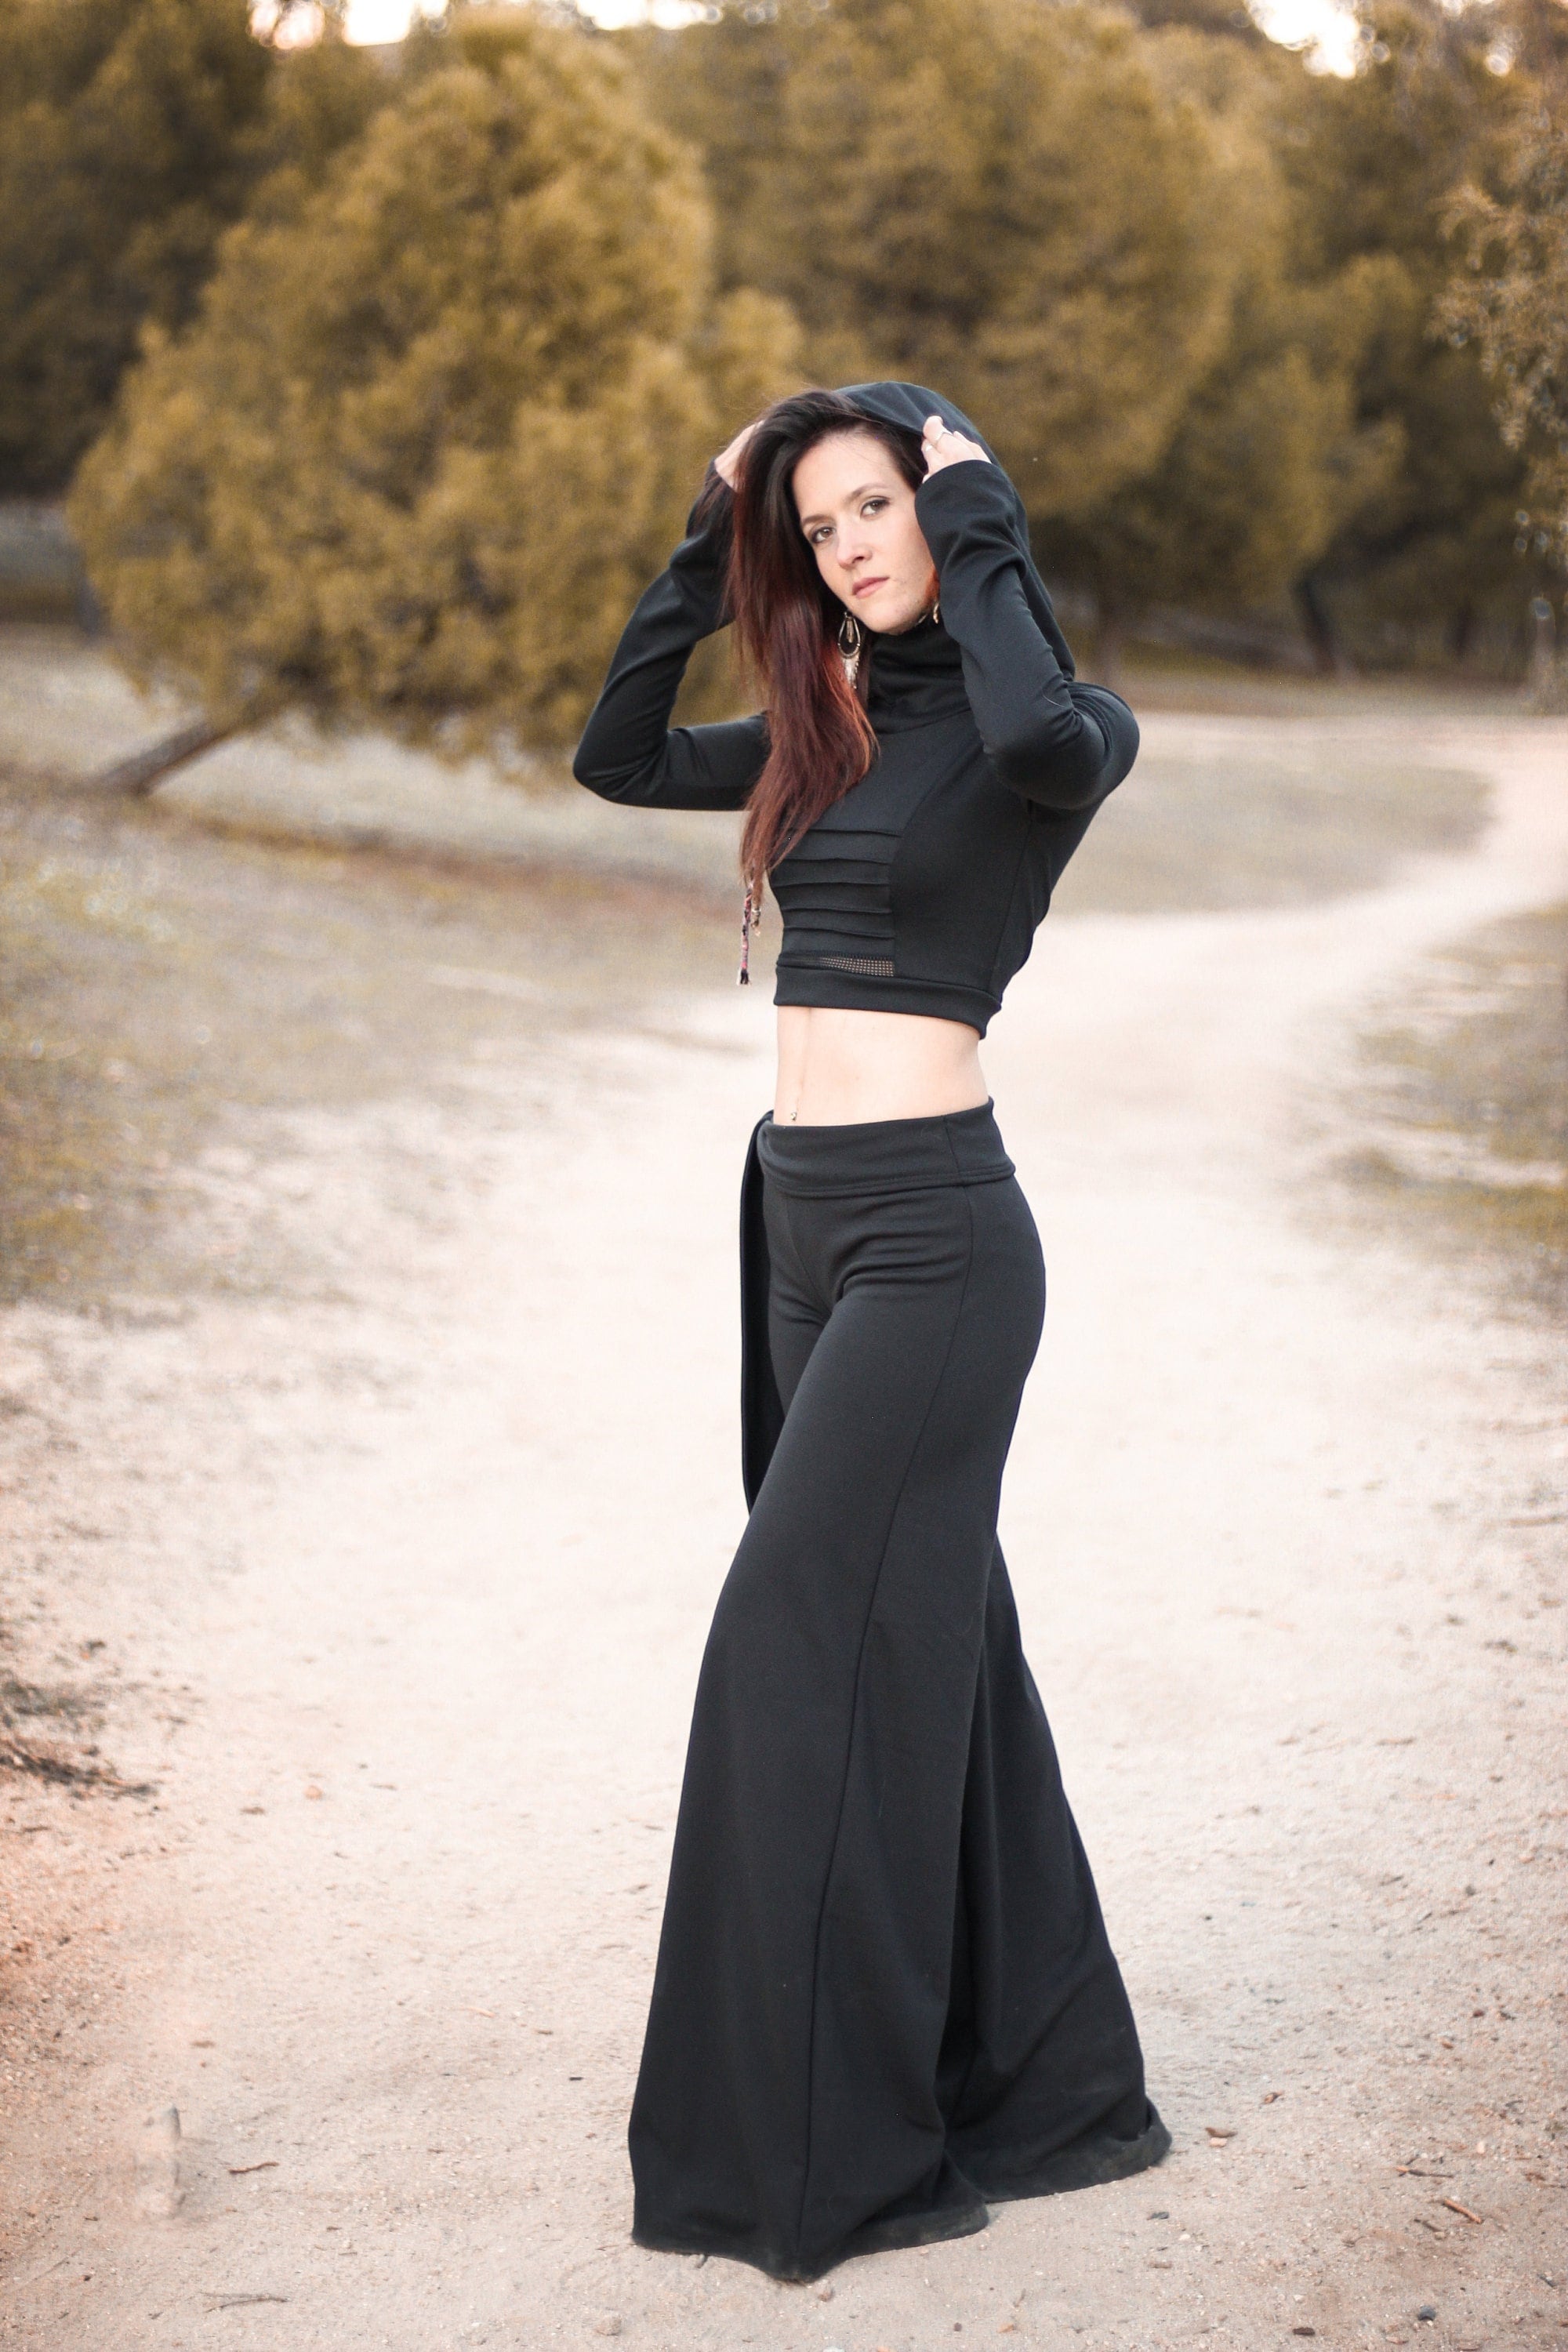 wide flare pants